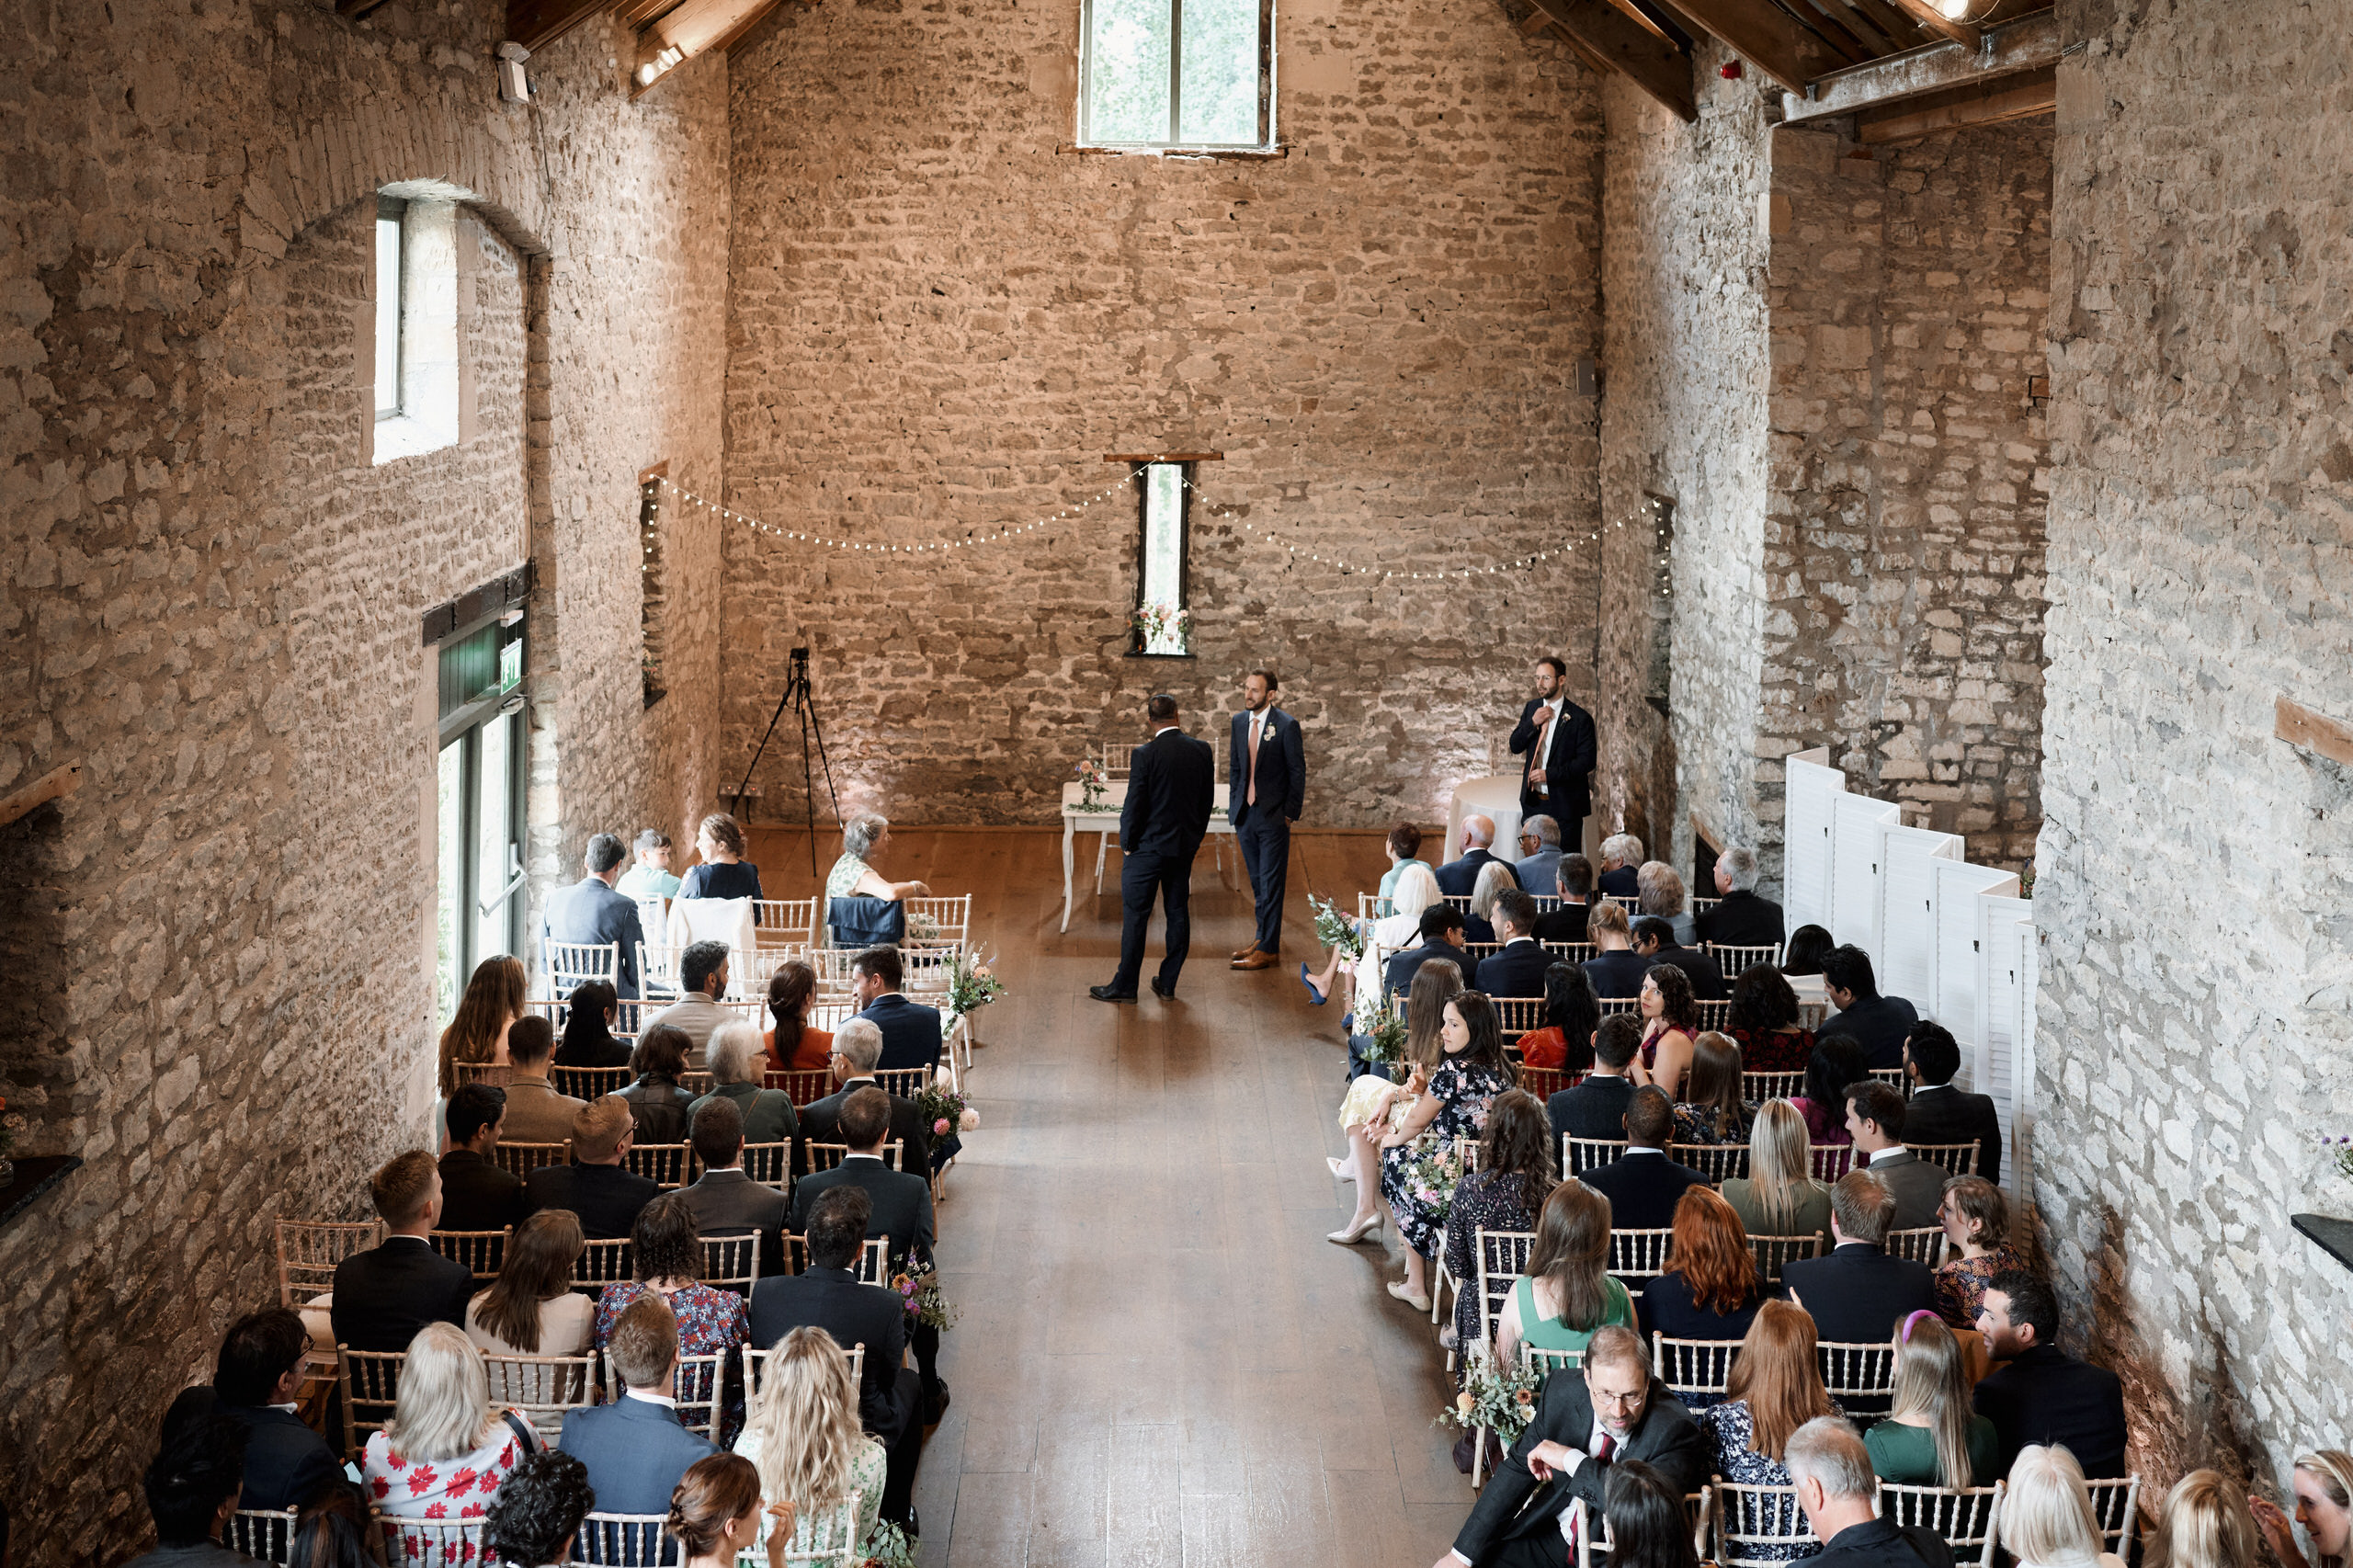 A wedding is taking place in a barn made of stone.